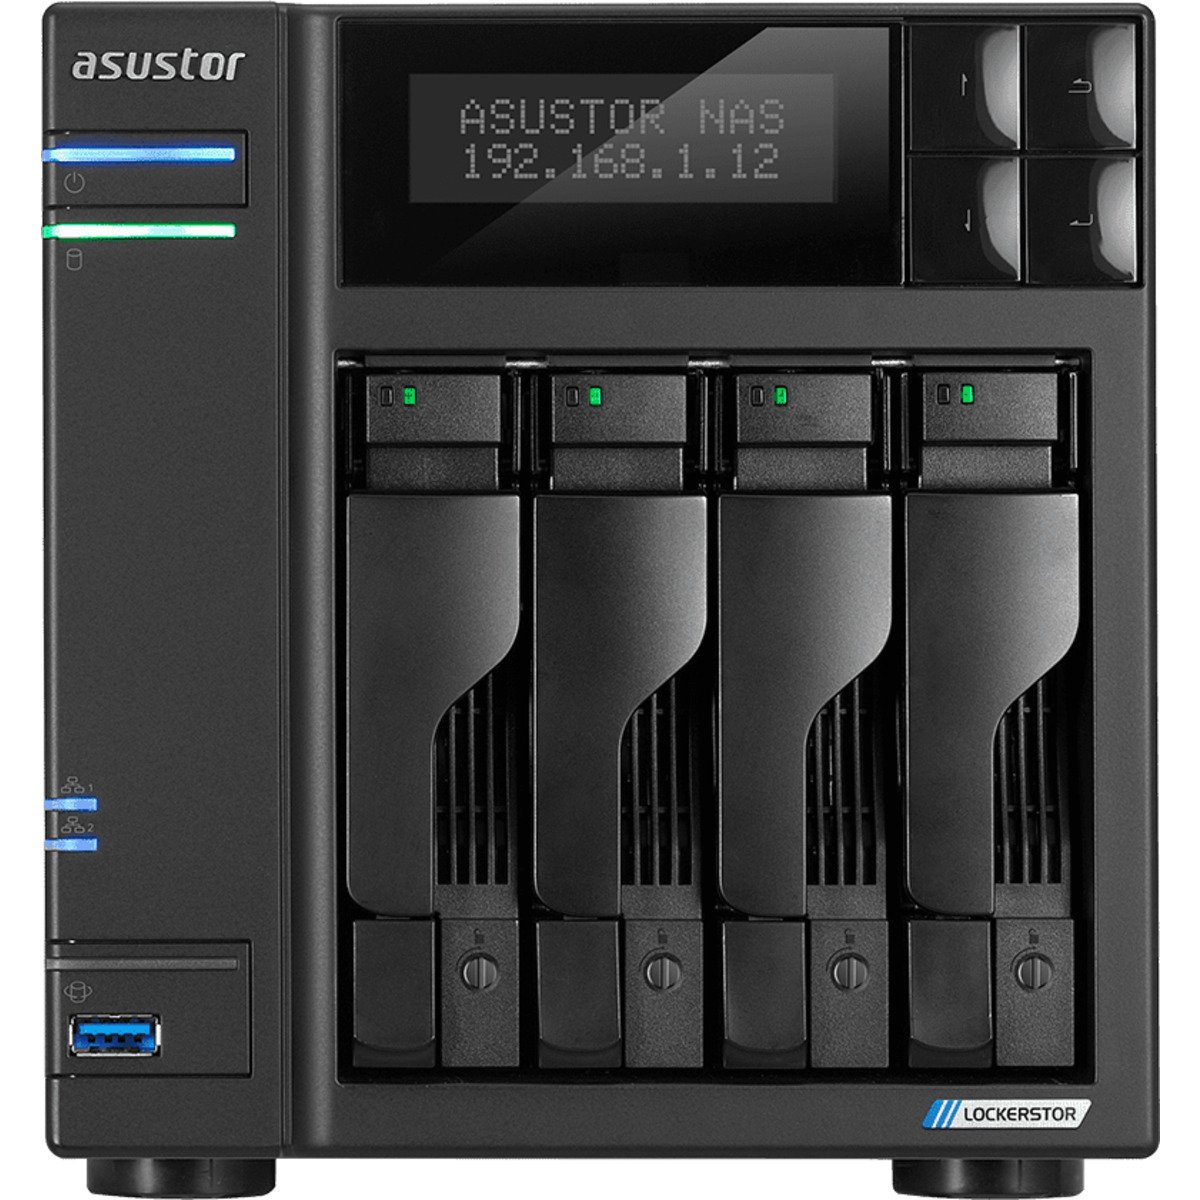 ASUSTOR AS6604T Lockerstor 4 48tb 4-Bay Desktop Multimedia / Power User / Business NAS - Network Attached Storage Device 4x12tb Seagate EXOS X18 ST12000NM000J 3.5 7200rpm SATA 6Gb/s HDD ENTERPRISE Class Drives Installed - Burn-In Tested - FREE RAM UPGRADE AS6604T Lockerstor 4